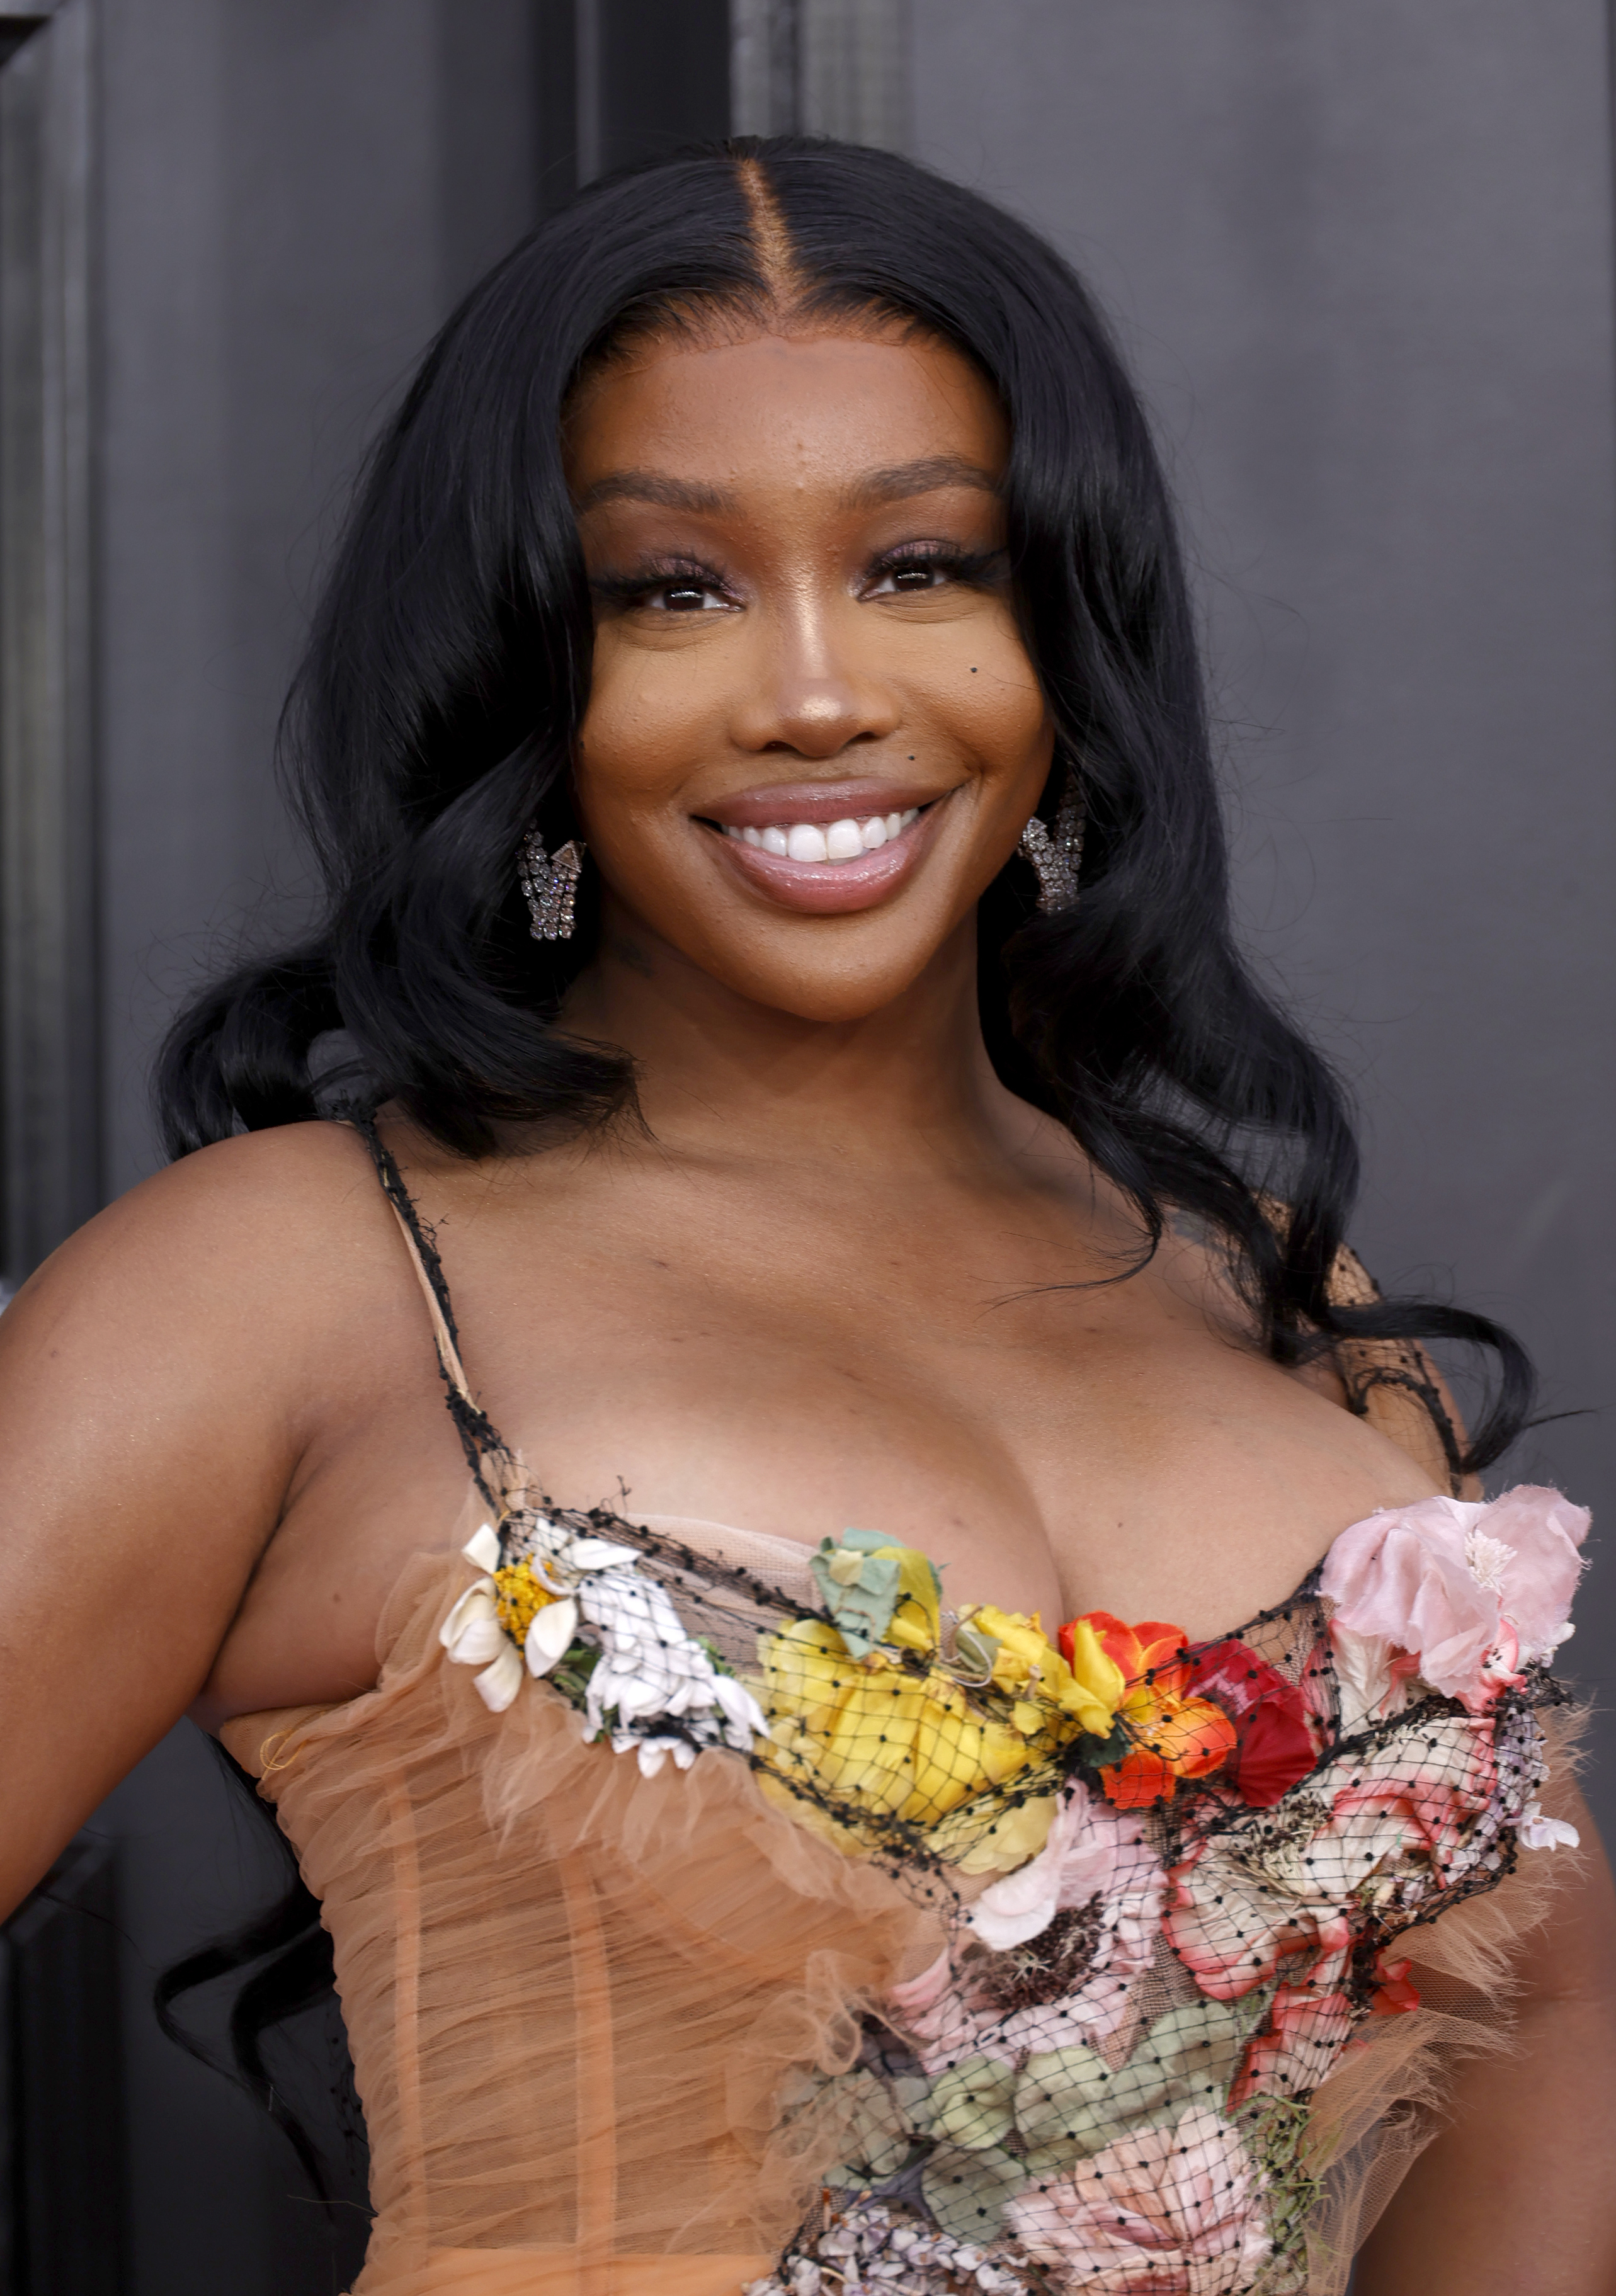 Close-up of SZA smiling and wearing a colorful, spaghetti-strap top